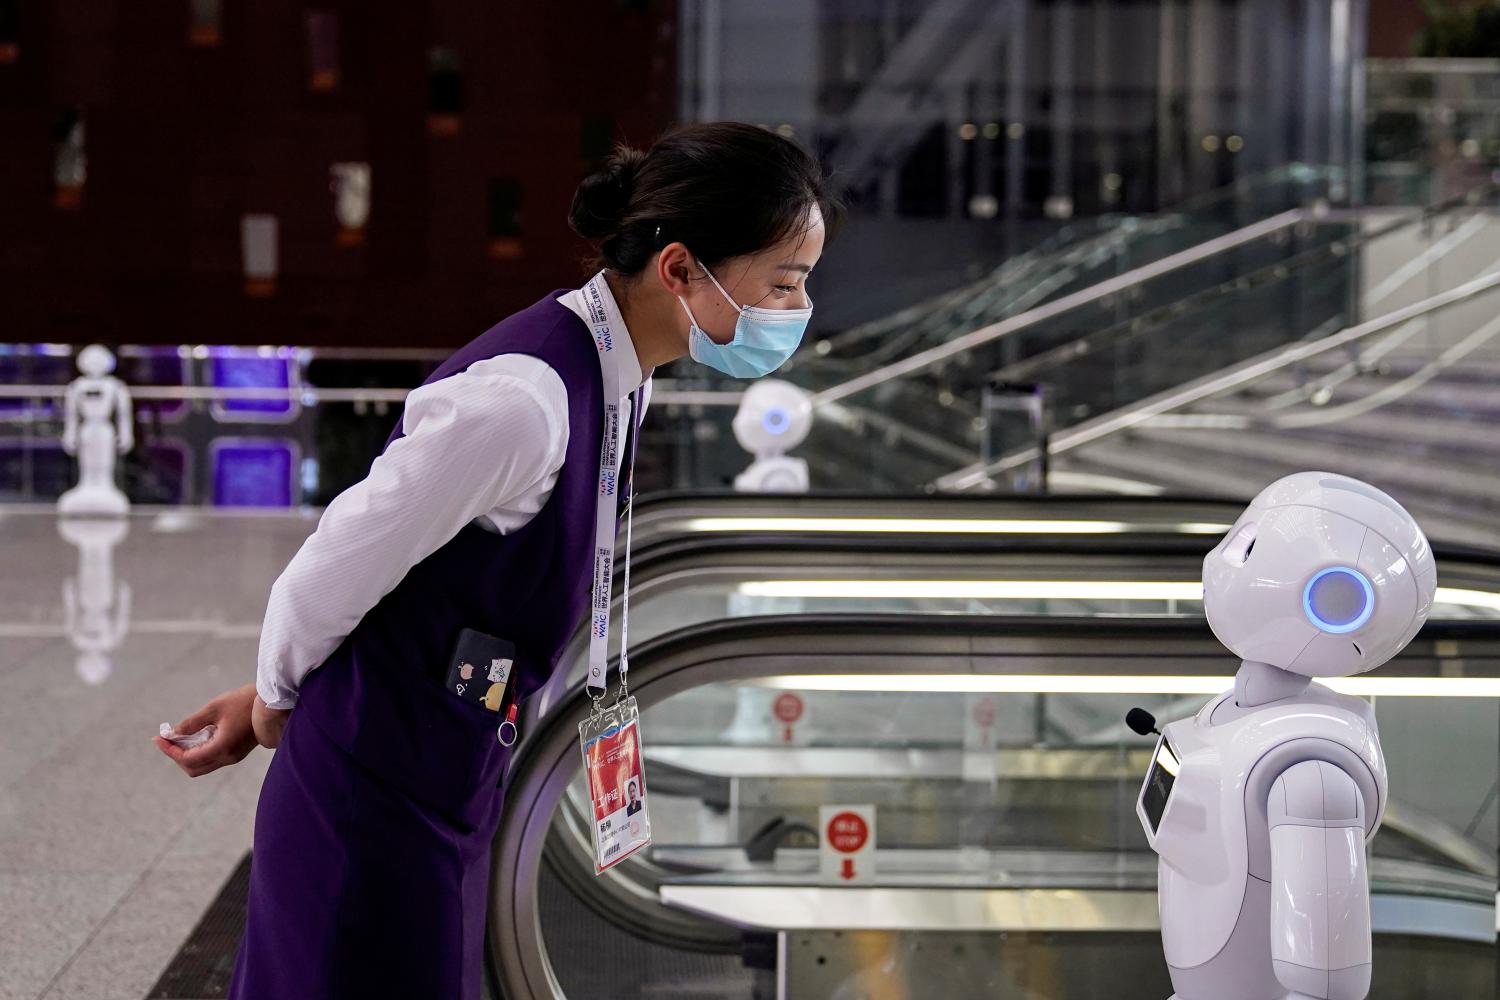 A staff member wearing a face mask following the COVID-19 outbreak looks at a robot at the venue for the World Artificial Intelligence Conference in Shanghai, China on July 9, 2020.